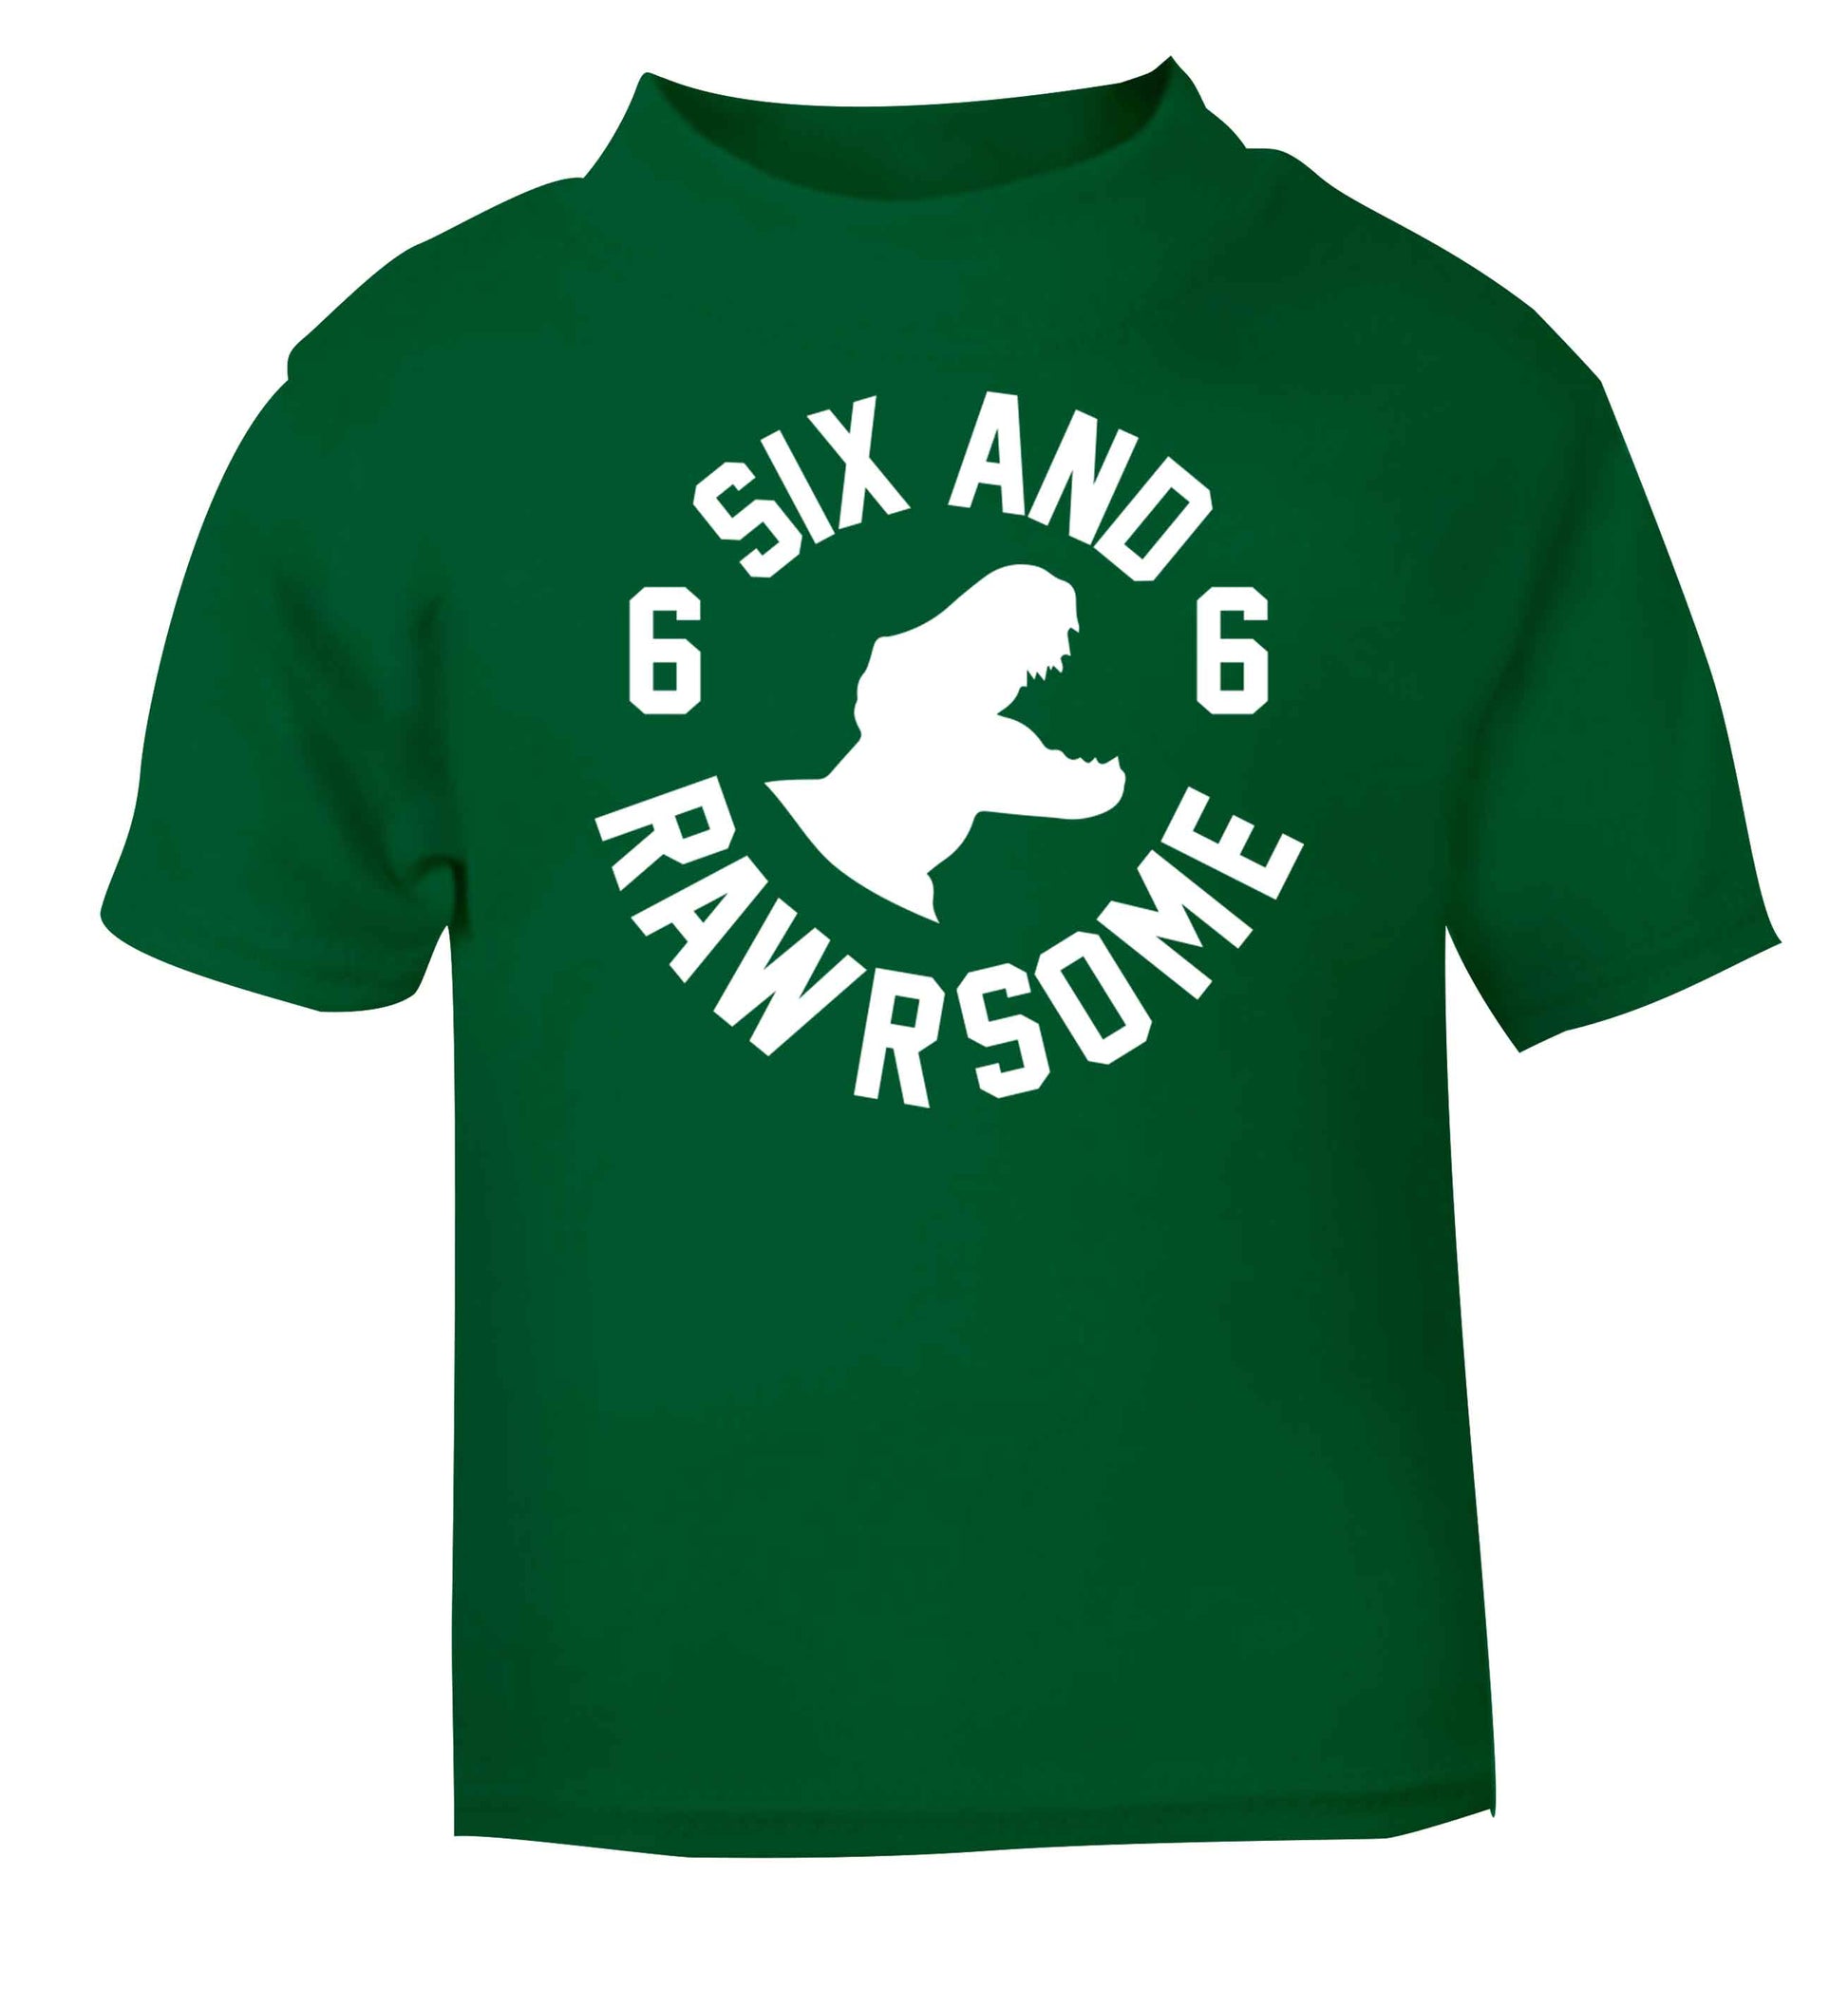 Six and rawrsome green baby toddler Tshirt 2 Years